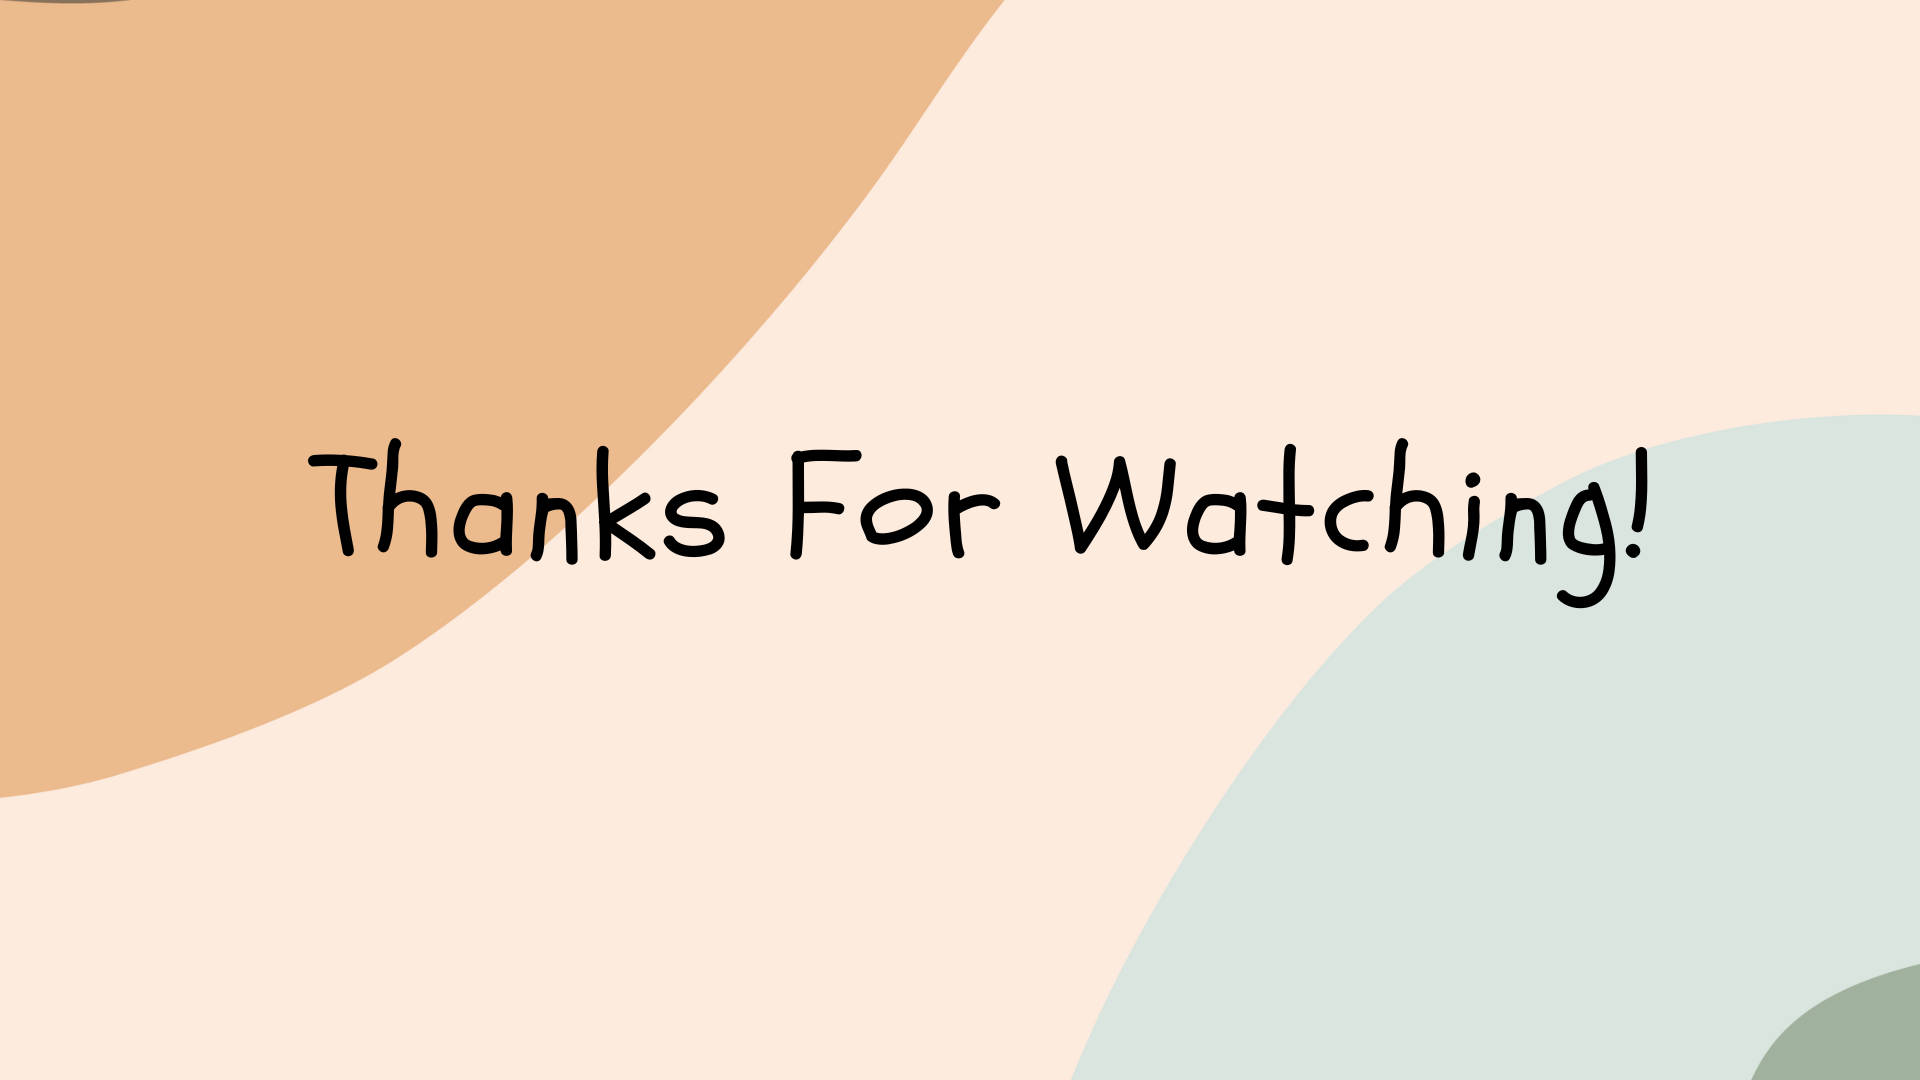 Captivating Thank You For Watching Message In Pastel Background Background